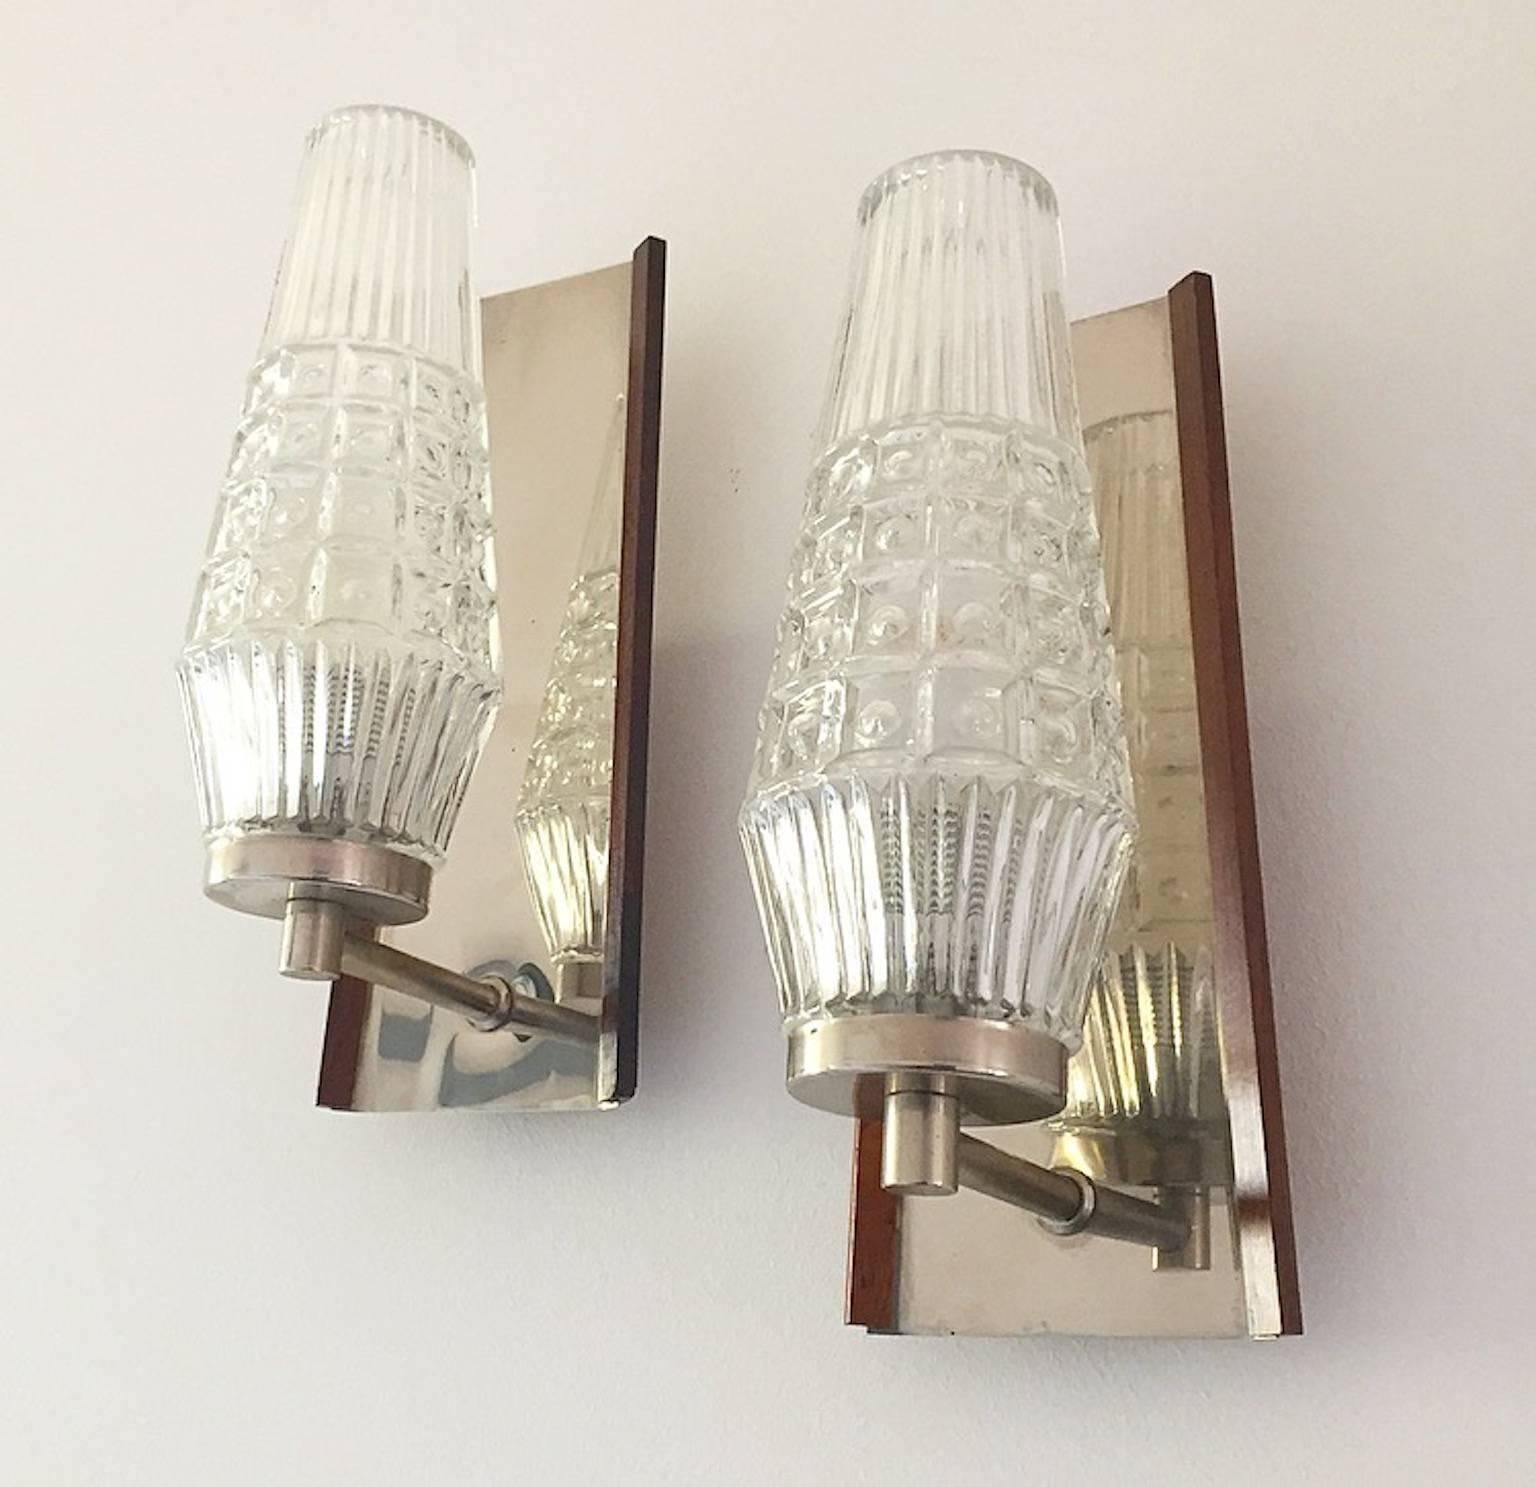 Mid-20th Century Danish Mid-Century Glass Sconces with Rosewood Details For Sale